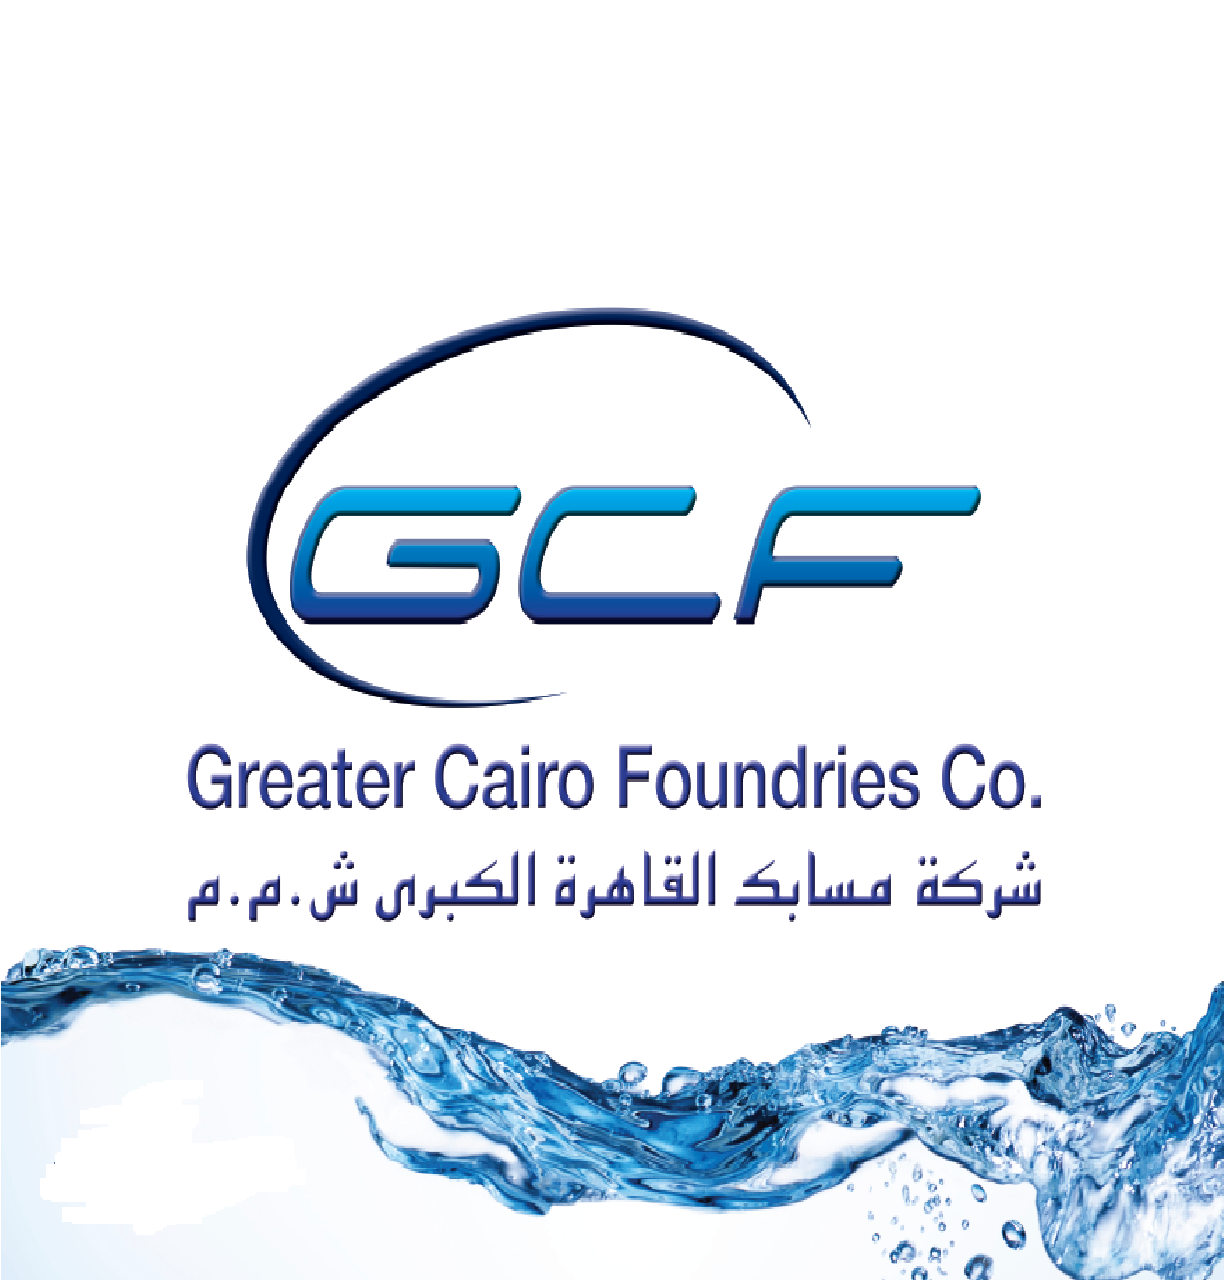 Greater Cairo Foundries